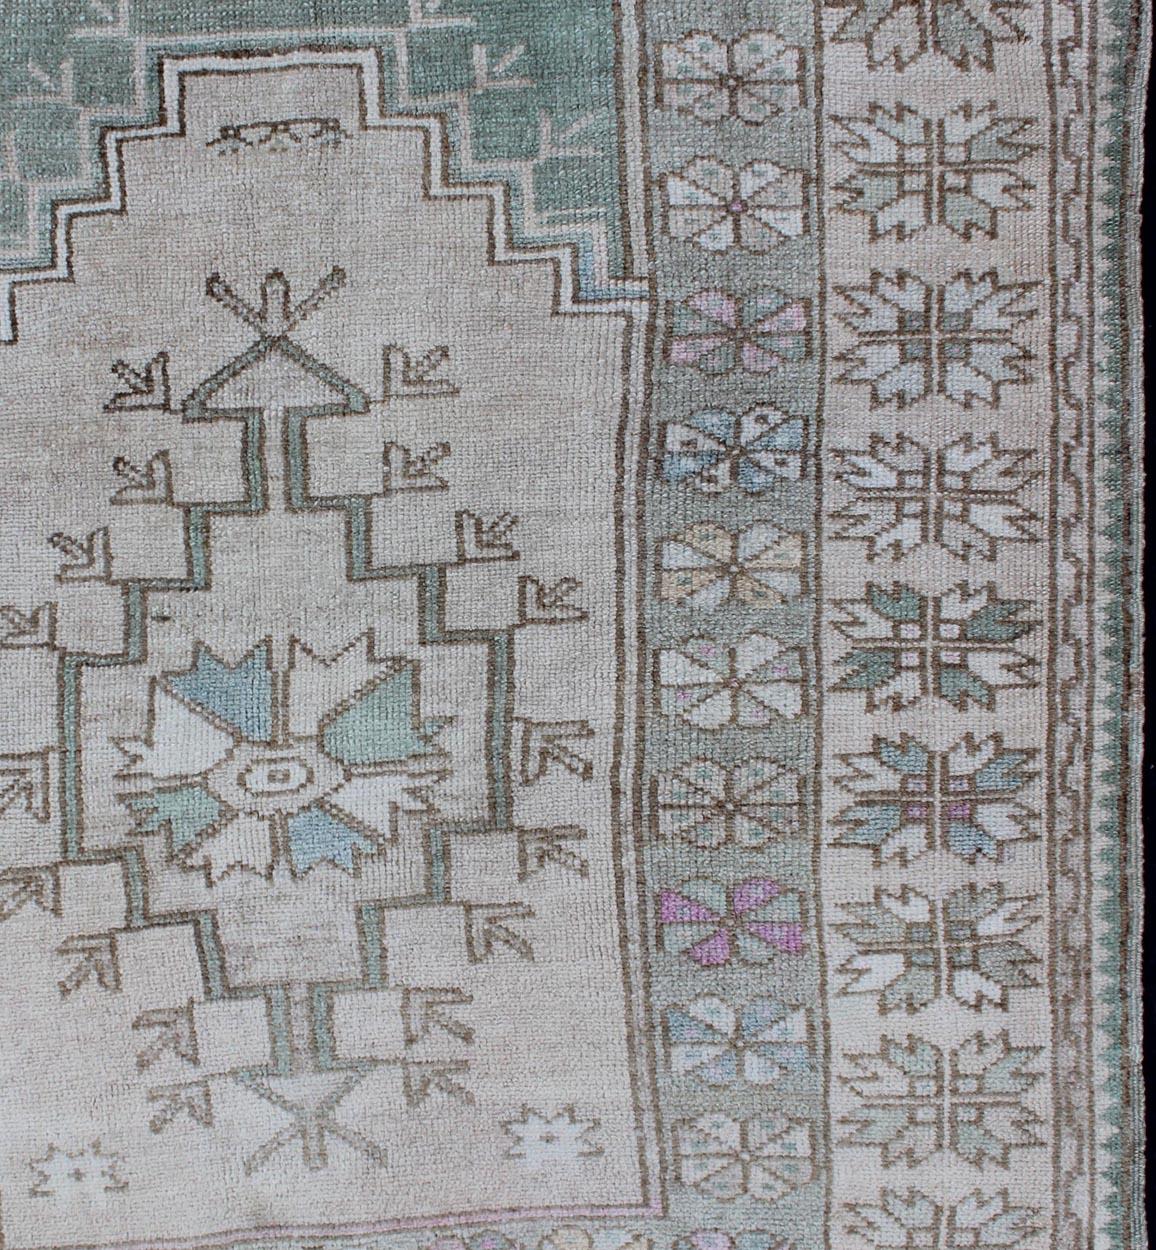 Tribal Vintage Turkish Oushak Square Rug With Medallion in Soft Green and Creams

Vintage tribal Turkish Oushak square size rug with medallion in tan, cream and light green, Keivan Woven Arts/ rug EN-176994, country of origin / type: Turkey /